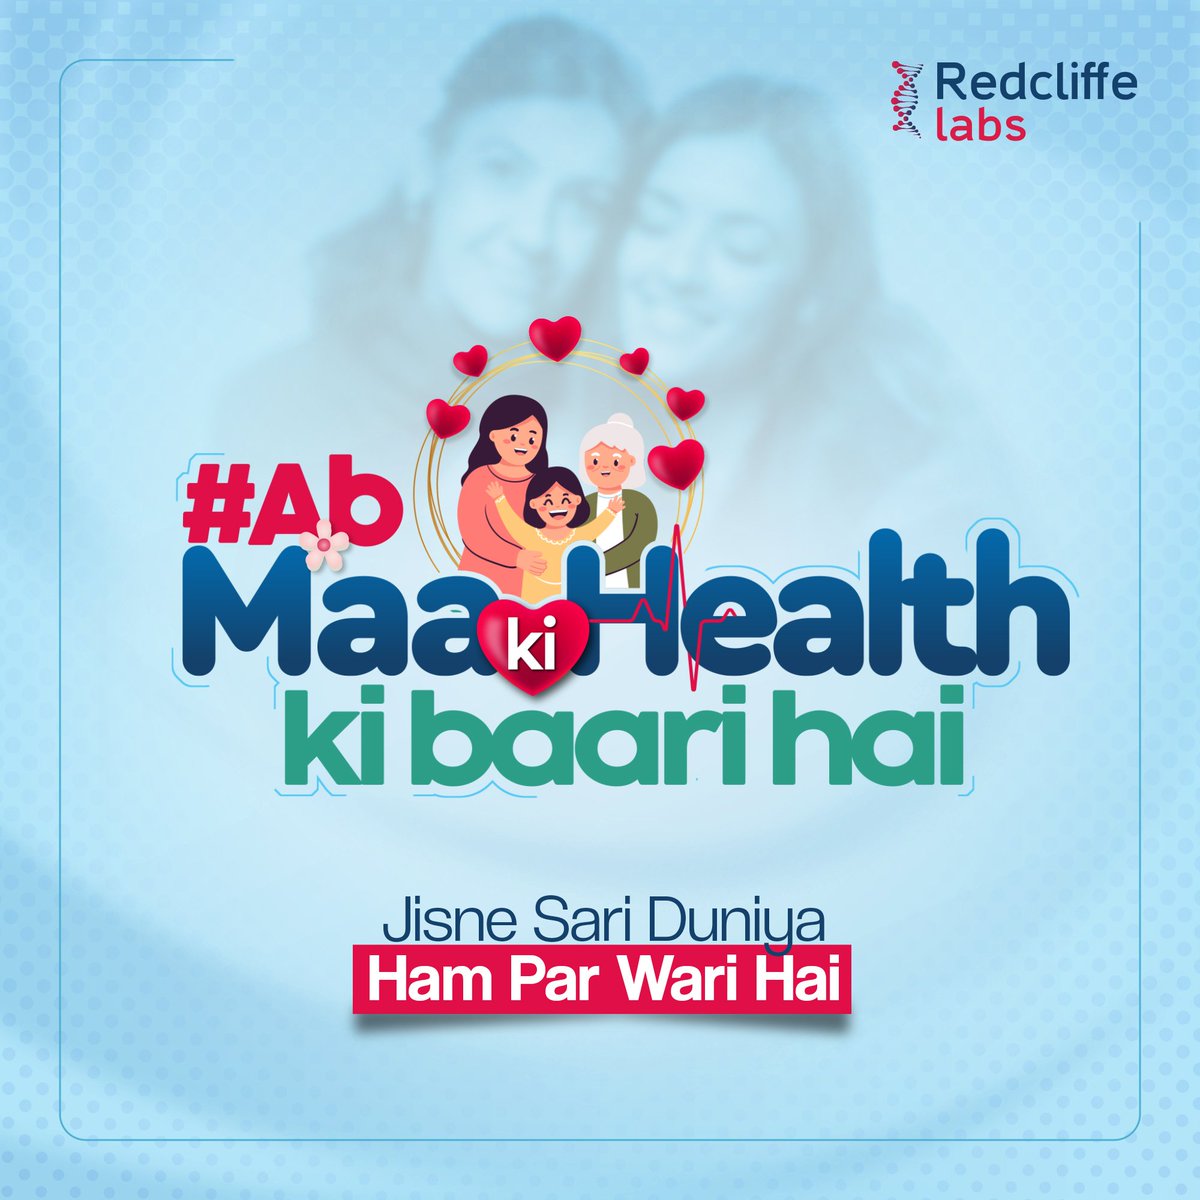 Mothers have selflessly cared for us, but it's time to turn the tables and ensure their well-being. Whether encouraging regular check-ups, promoting a healthy lifestyle, or simply spending quality time together, let's show our love and gratitude. #AbMaaKiHealthKiBariHai